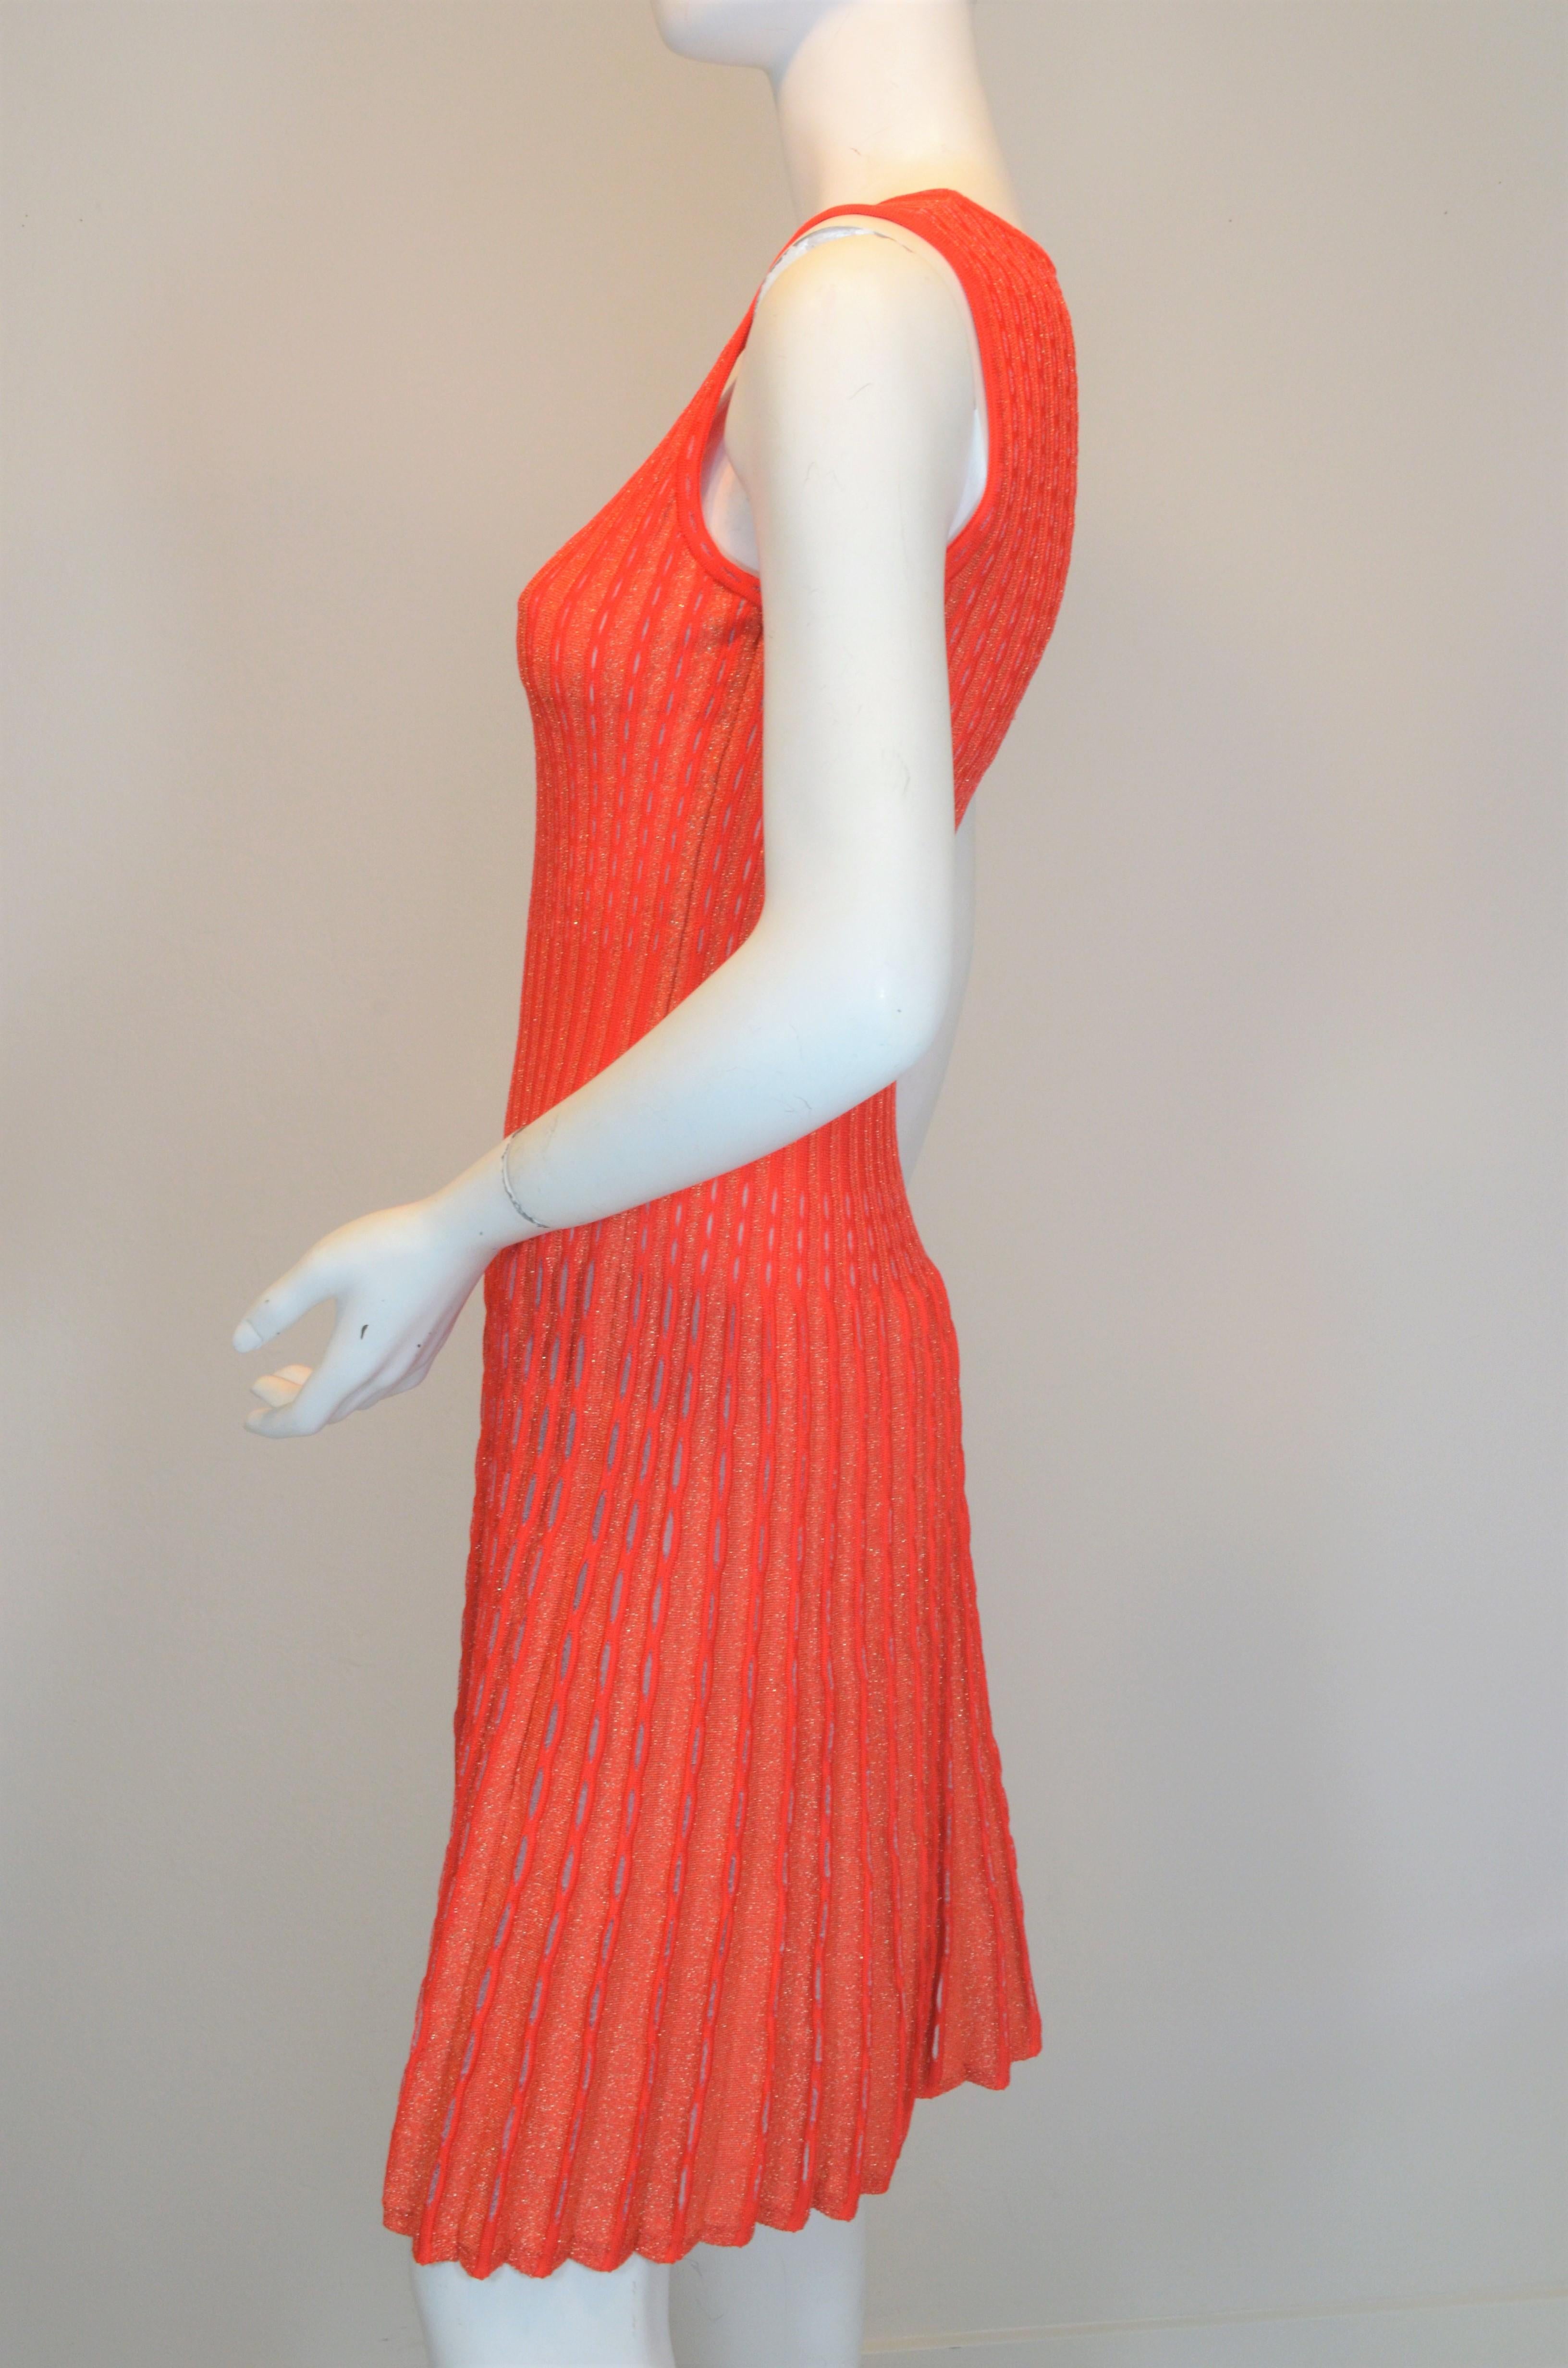 M Missoni fit and flare knitted dress is featured in a red and orange color with a shimmering, metallic  threading throughout. Dress is labeled size 42, made in Italy. 

Measurements:
Bust 30”, waist 26”, hips 34”, length 37” 